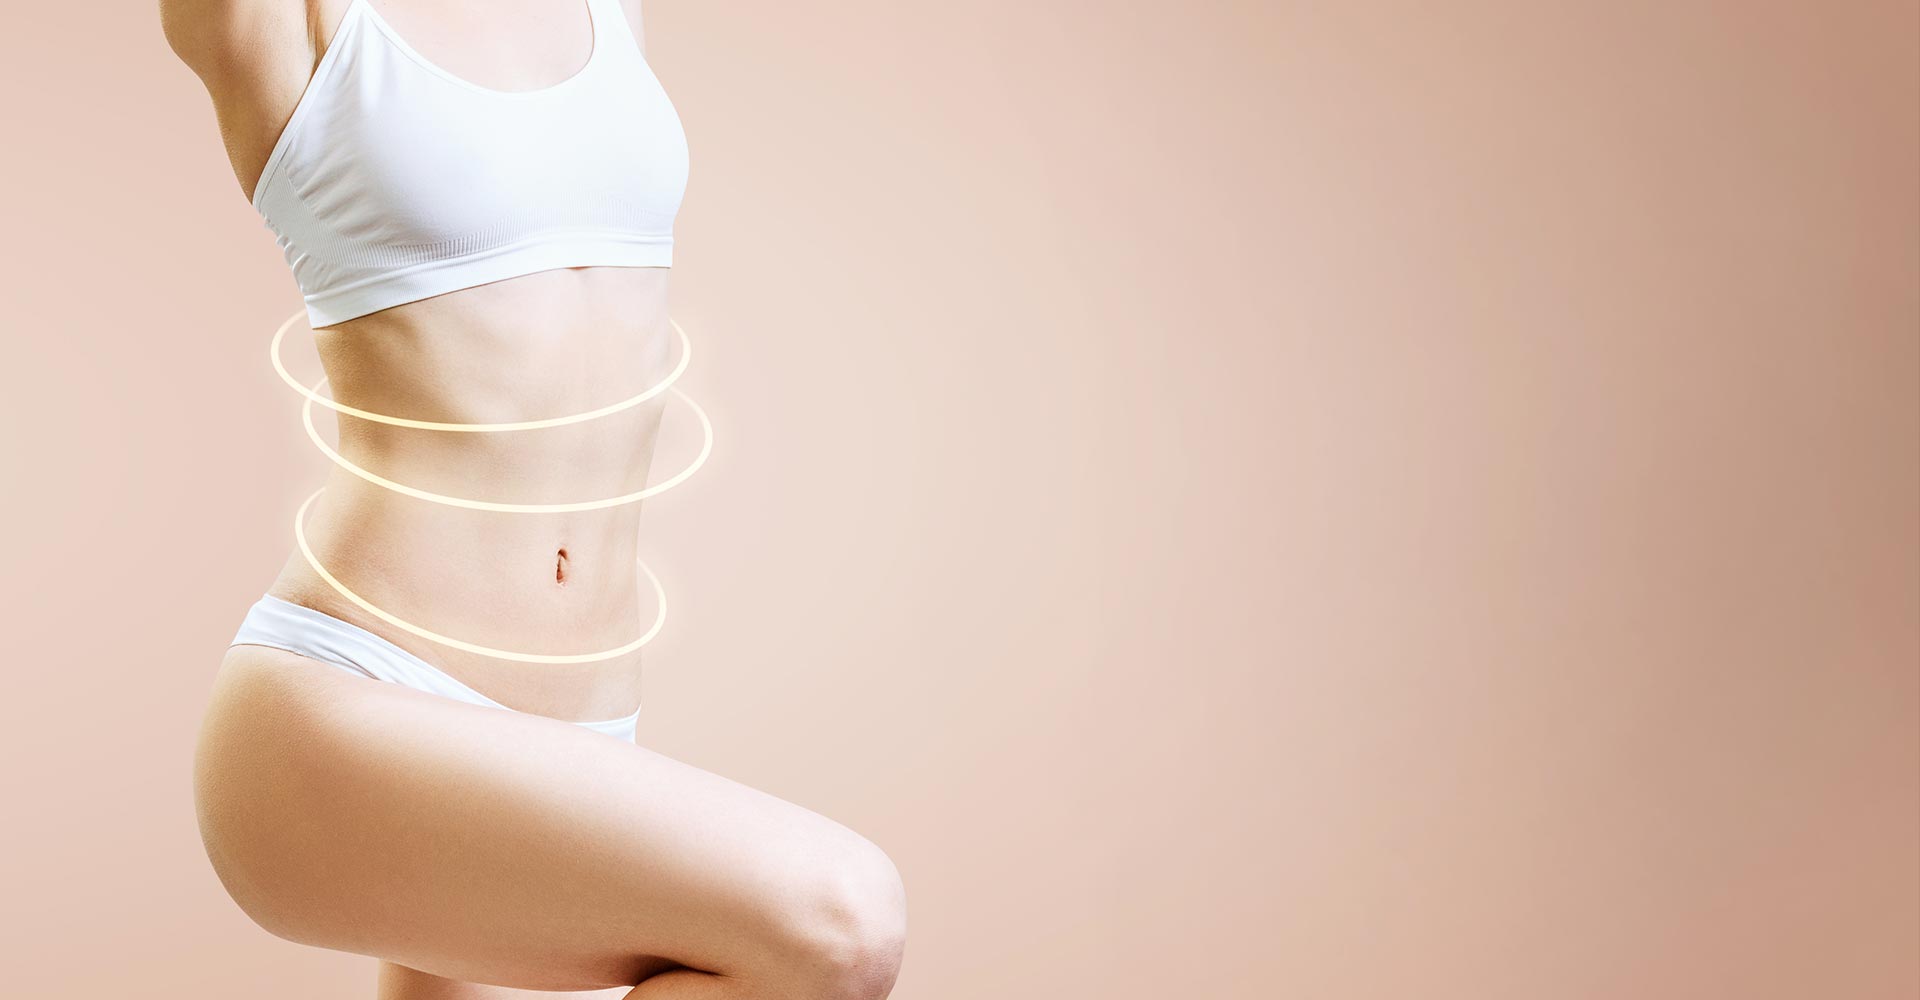 Slim woman body with glowing circles shows lifting effect.